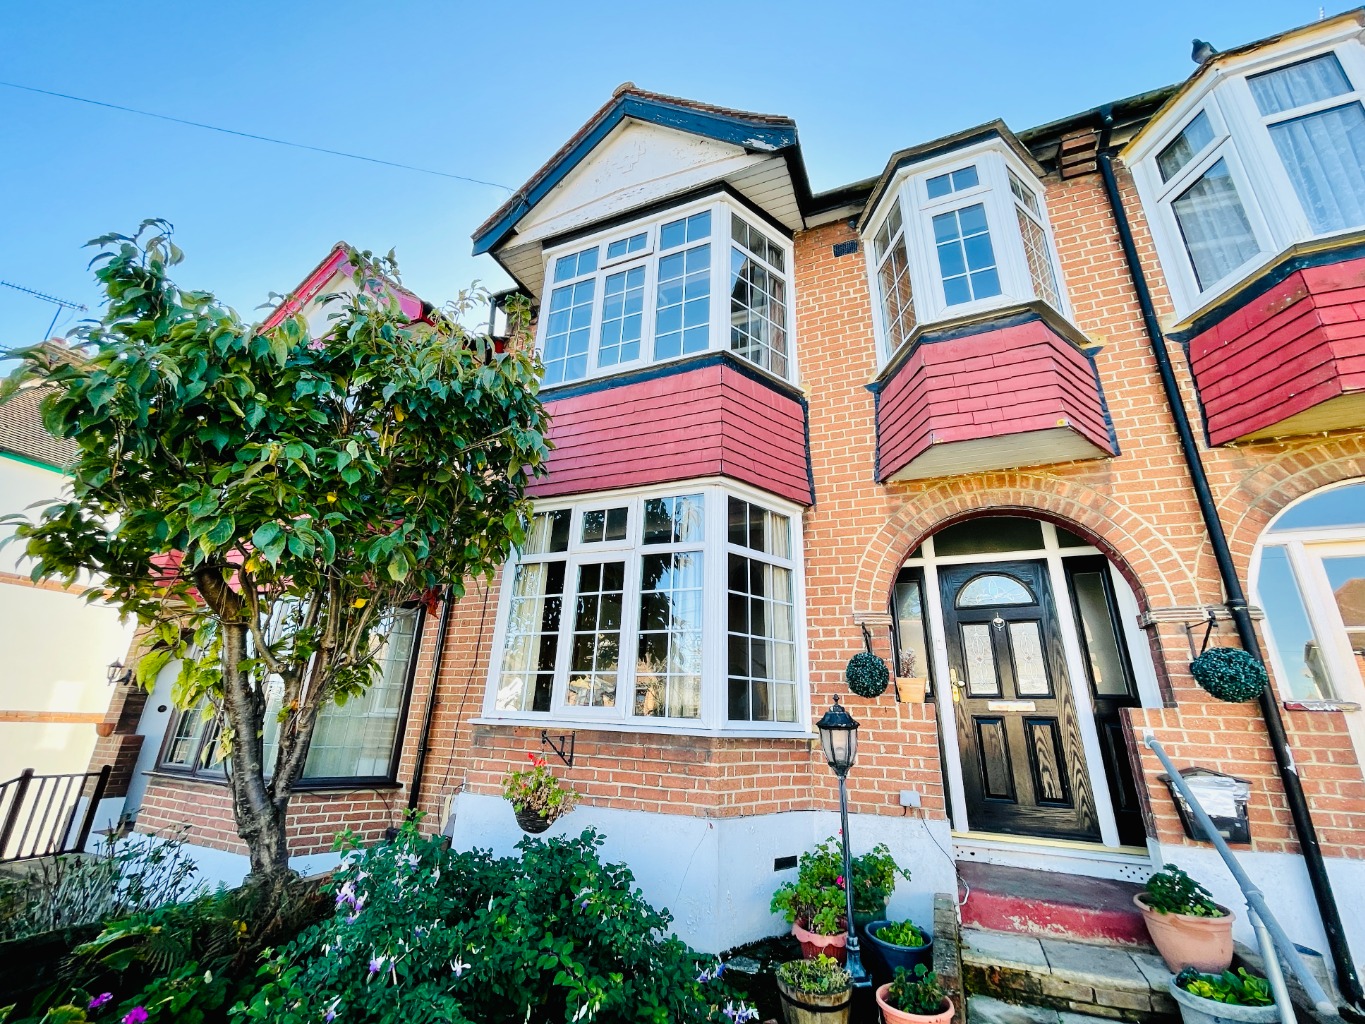 Estate Agents in Plumstead & Woolwich SE18, Beaumont Gibbs are pleased to offer for sale this four bedroomed & two reception roomed house for sale in Chelsworth Drive Plumstead, SE18.